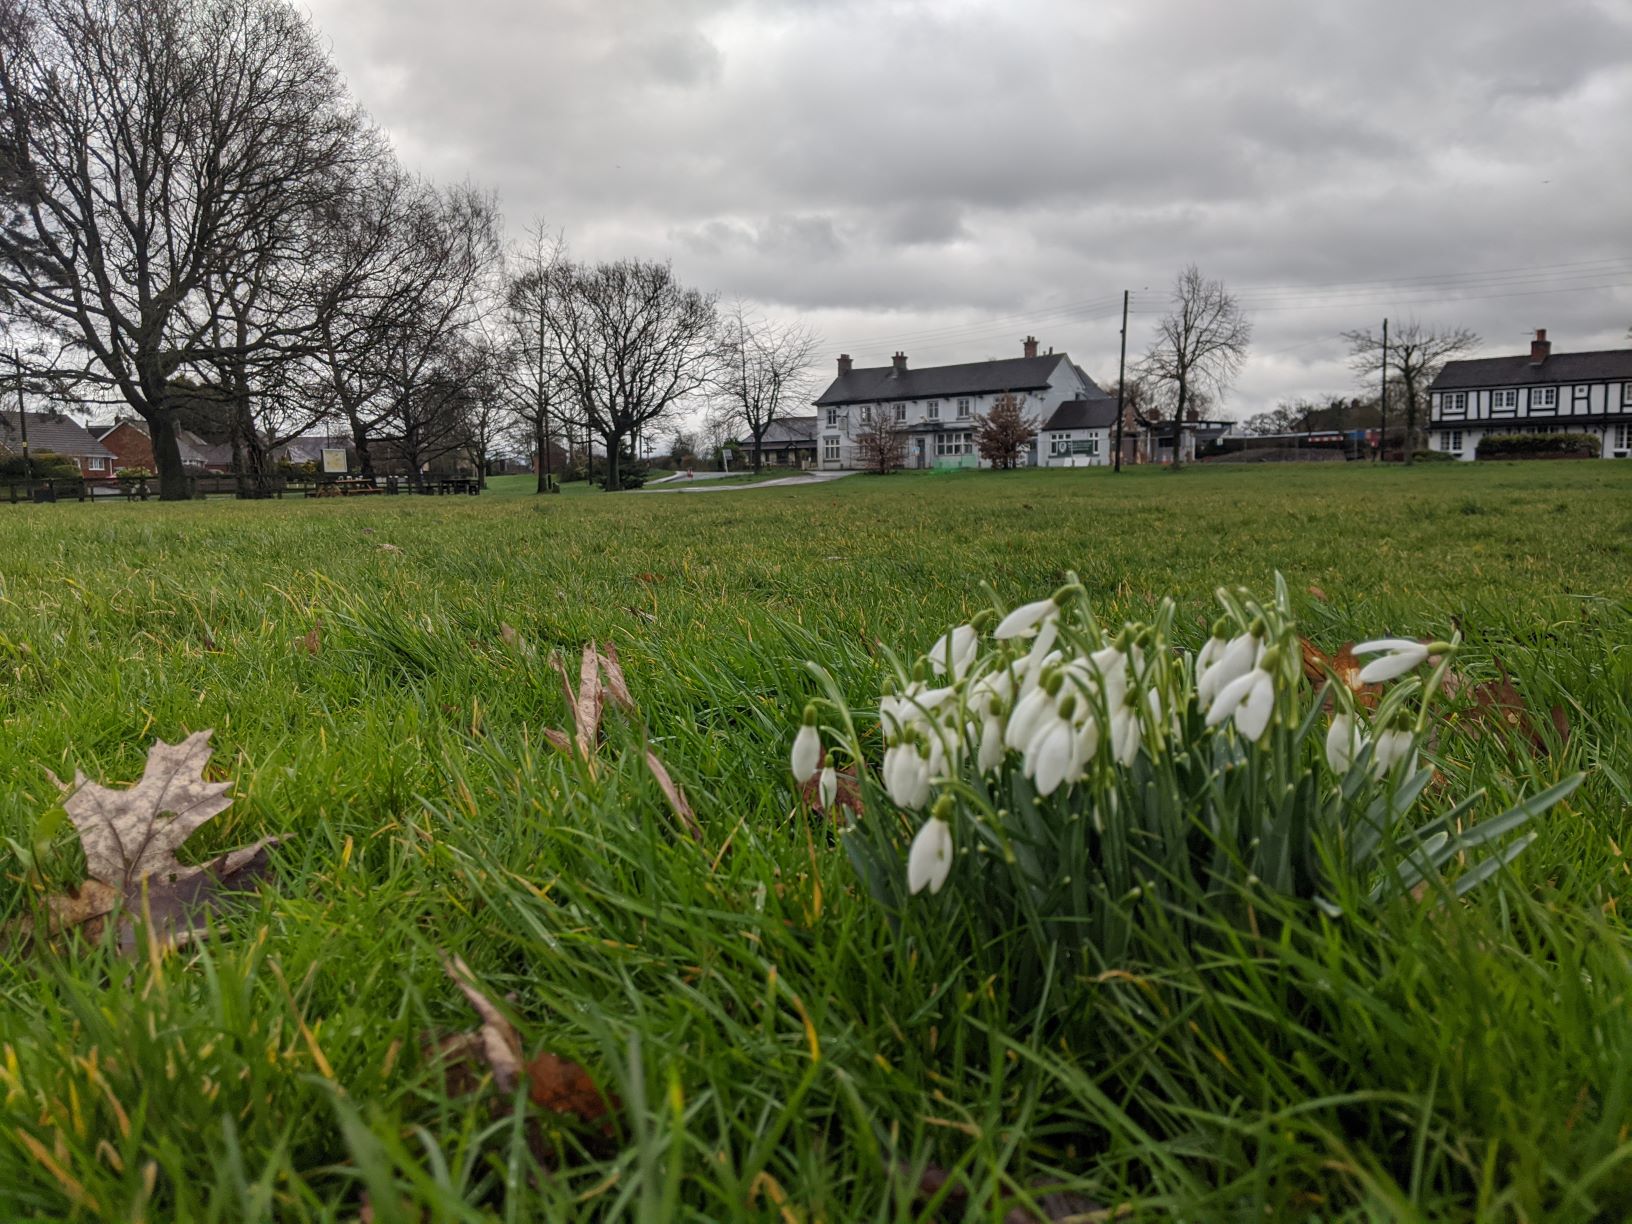 Snowdrops starting to show on the green